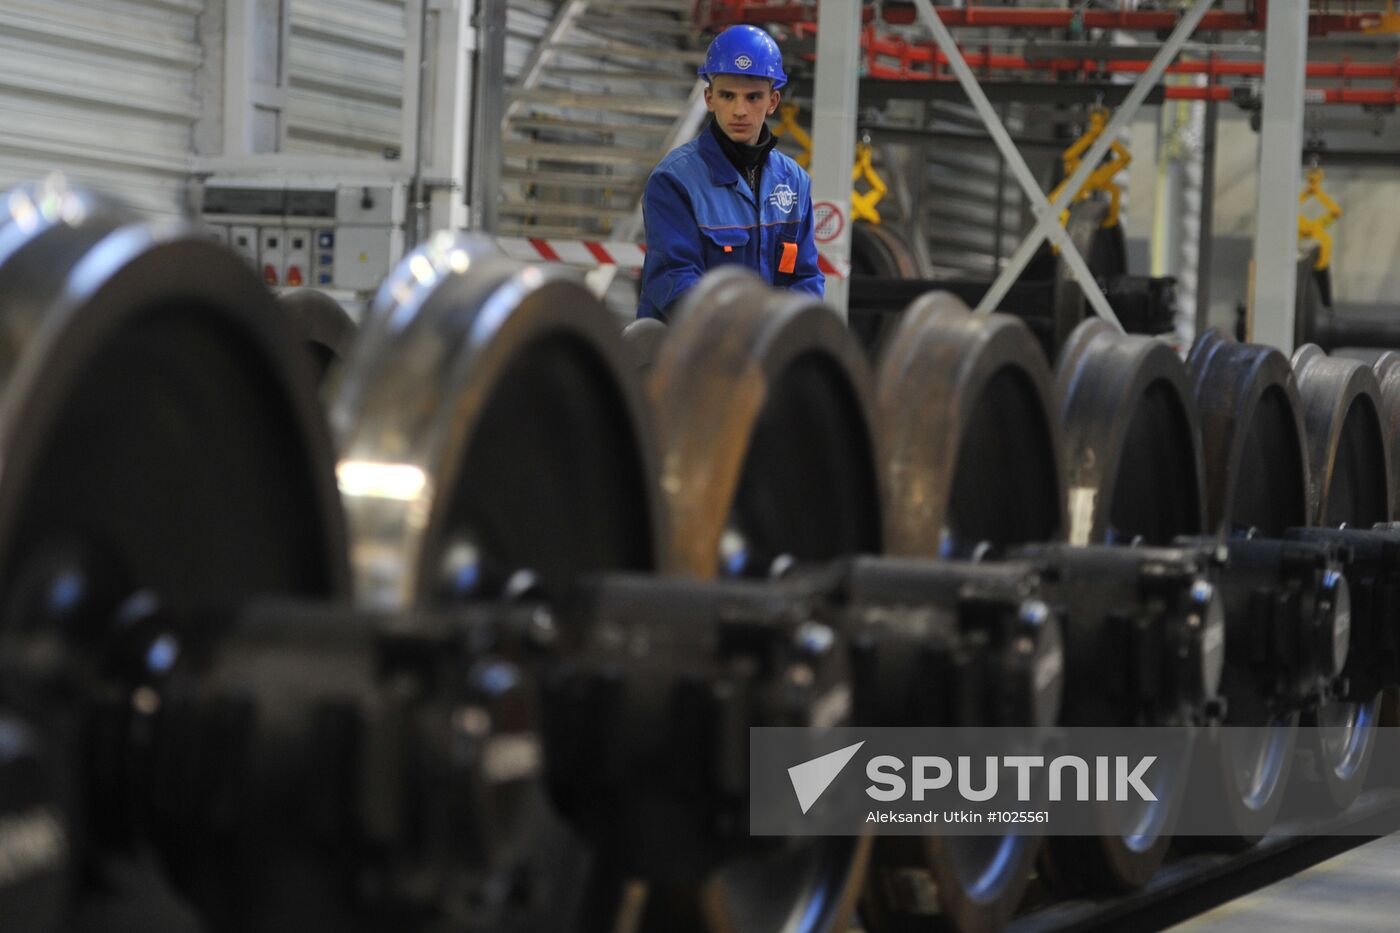 Tikhvin Carriage Works commissioned